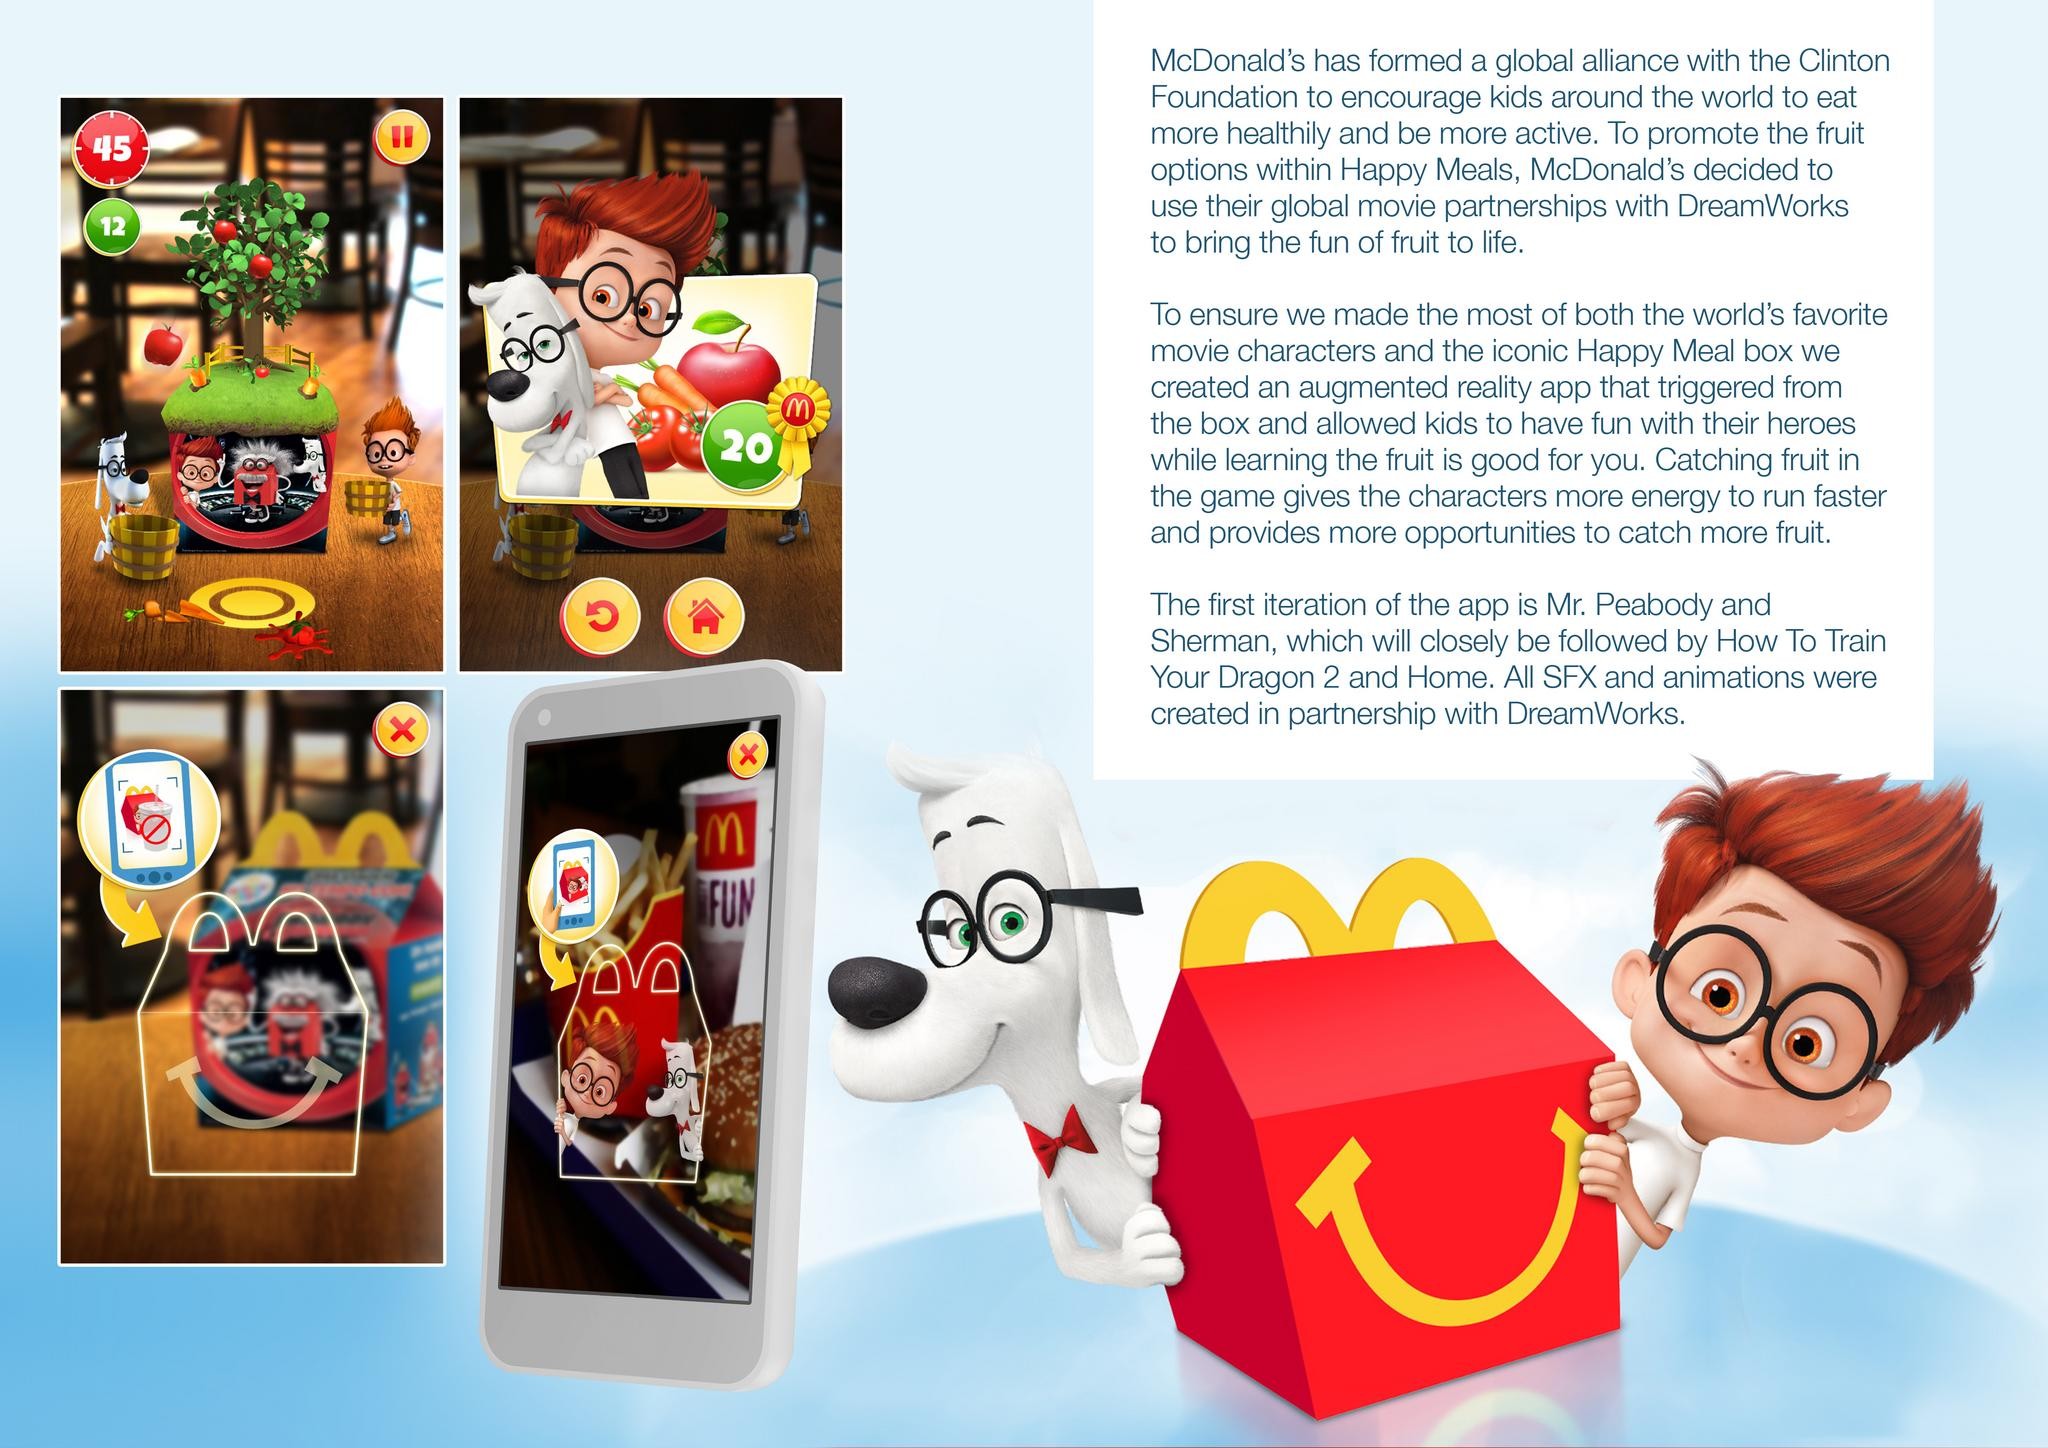 HAPPY MEAL GAMES